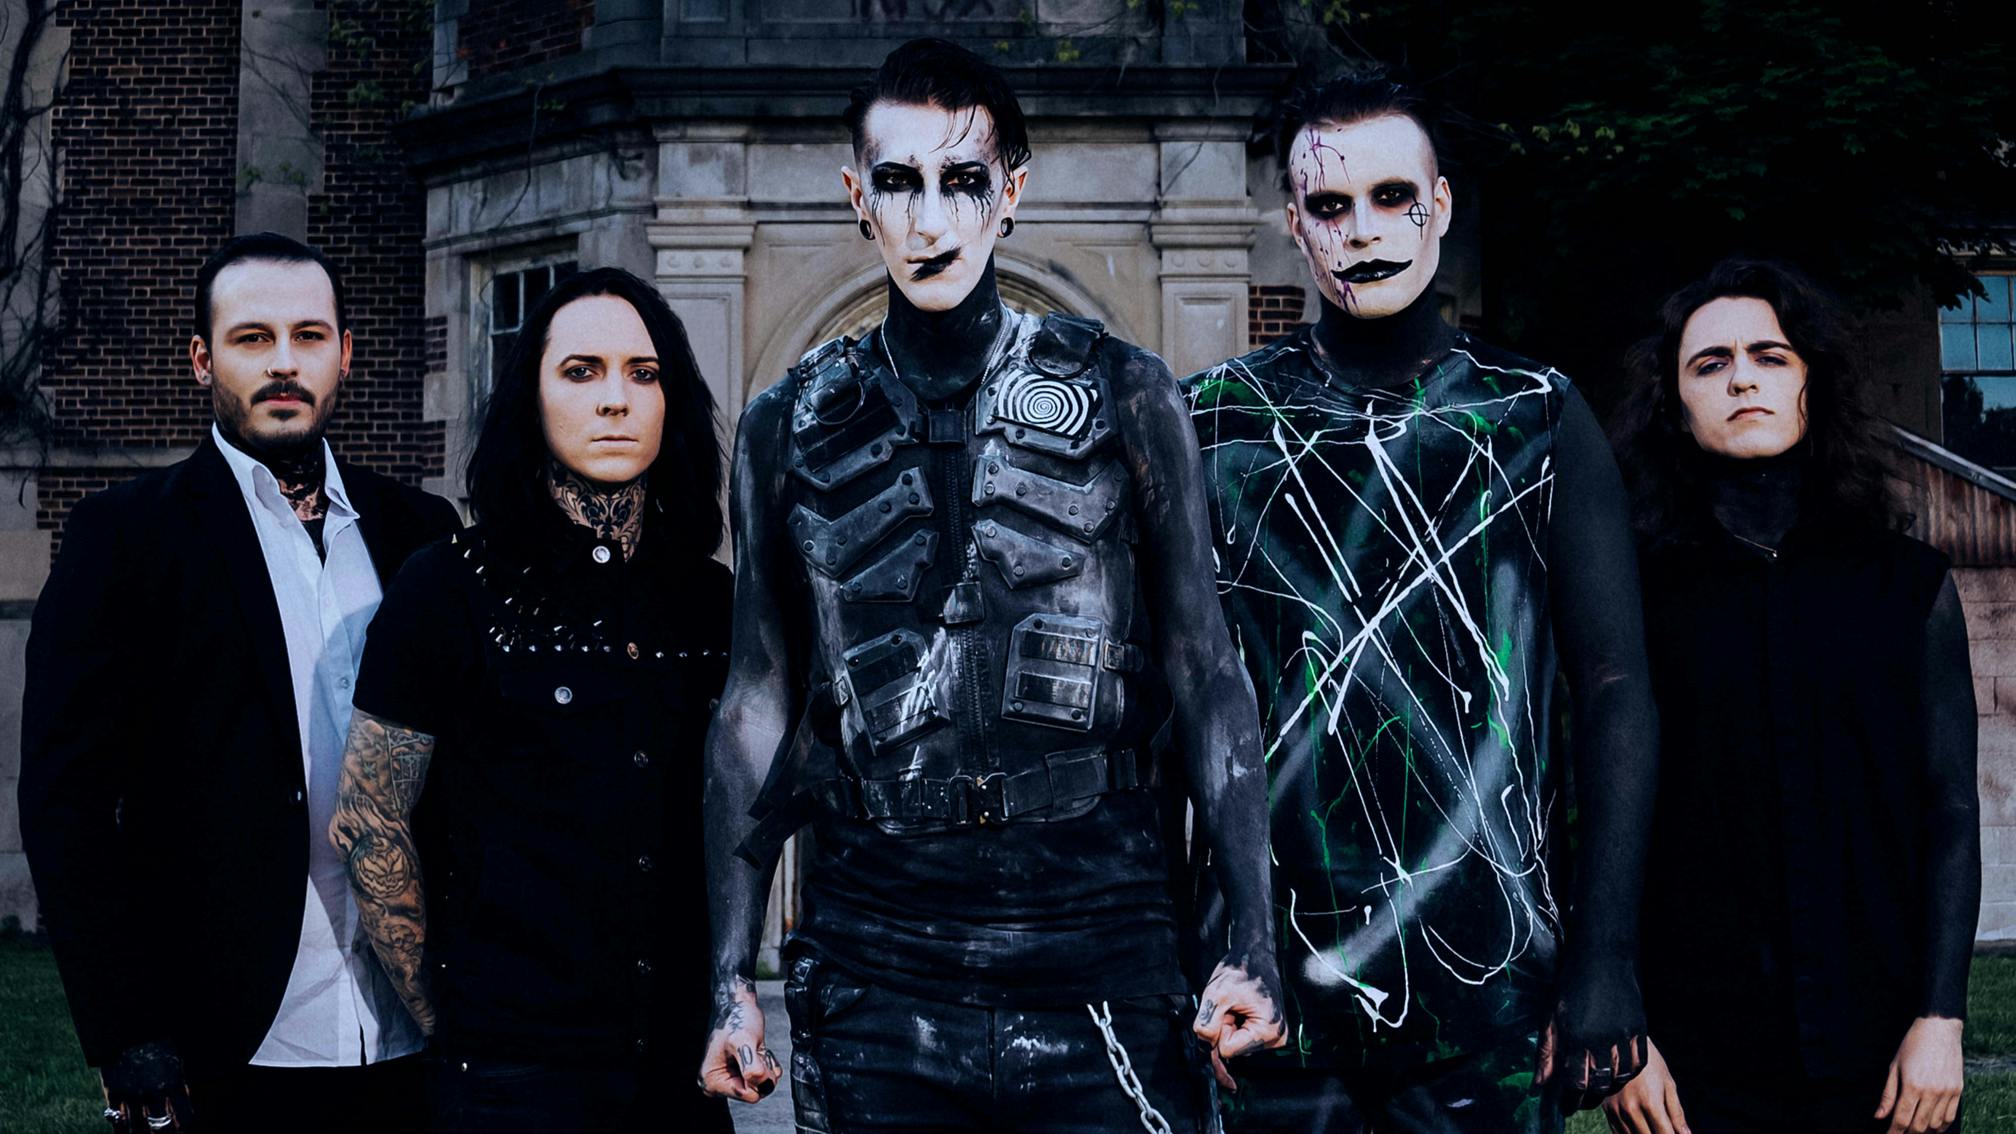 Motionless In White release heavy new single, Timebomb